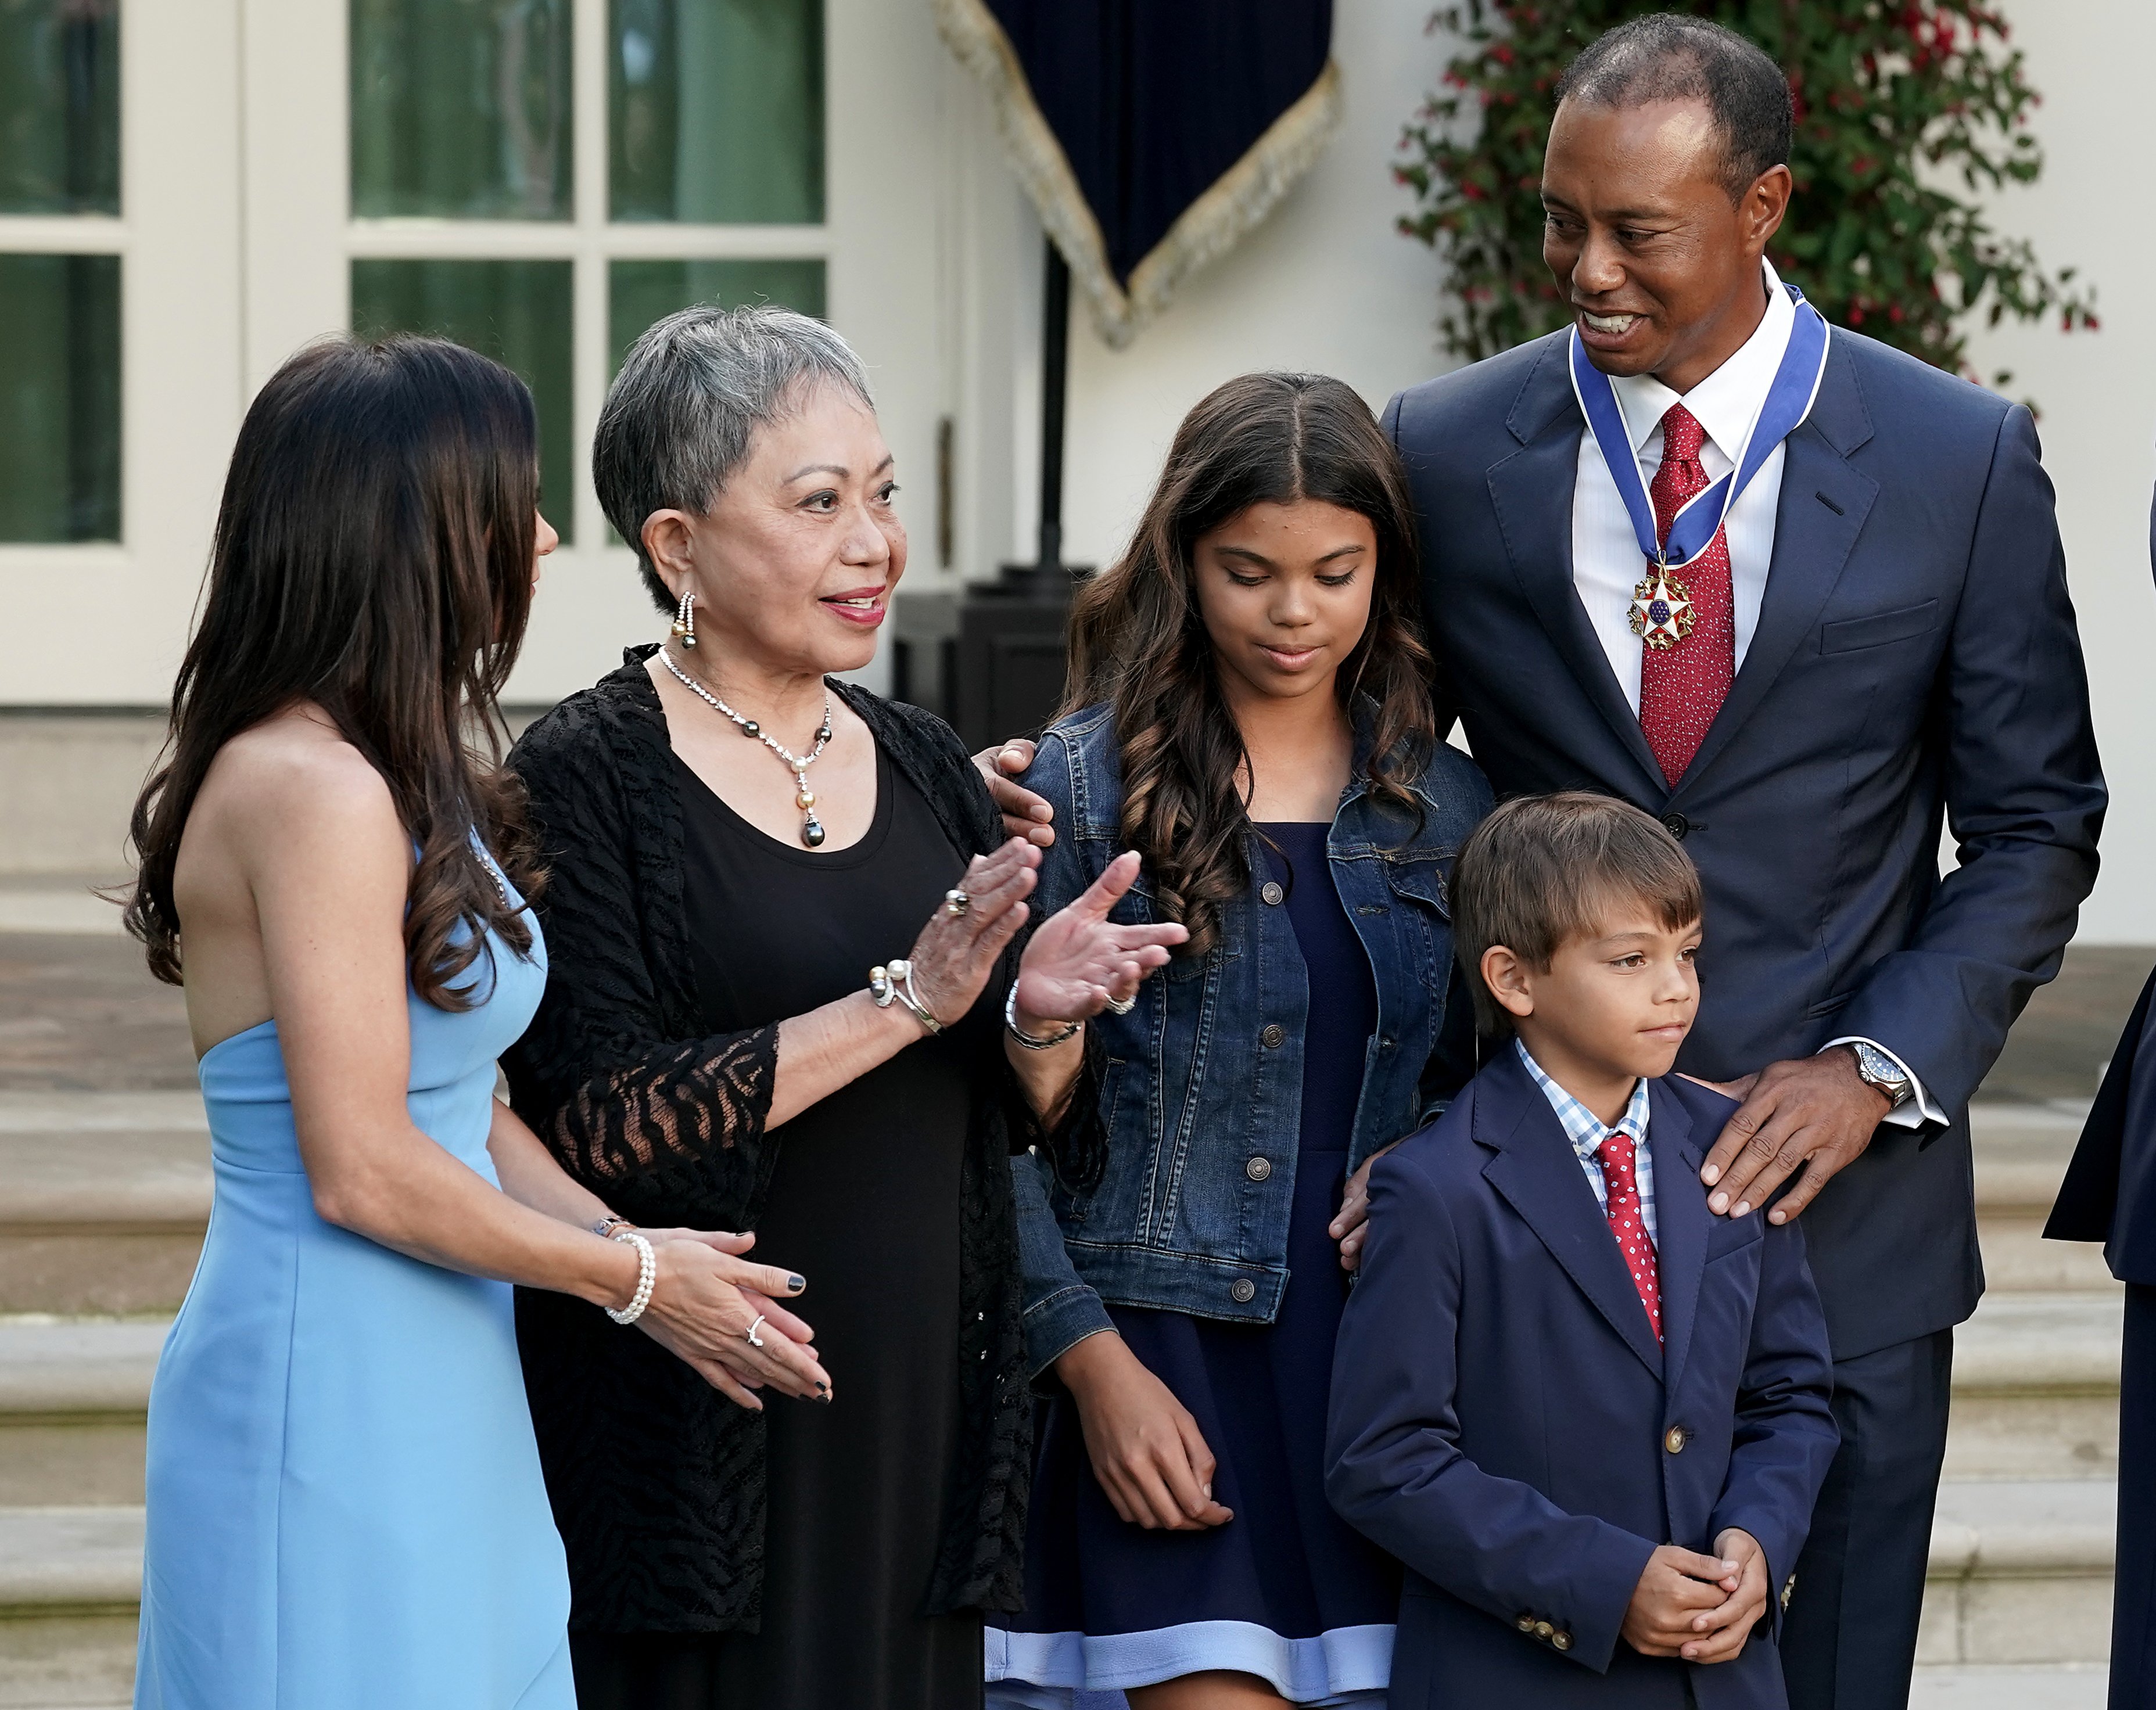 Tiger Woods and his family during his Medal of Freedom ceremony in the Rose Garden at the White House in 2019 | Photo: Getty Images